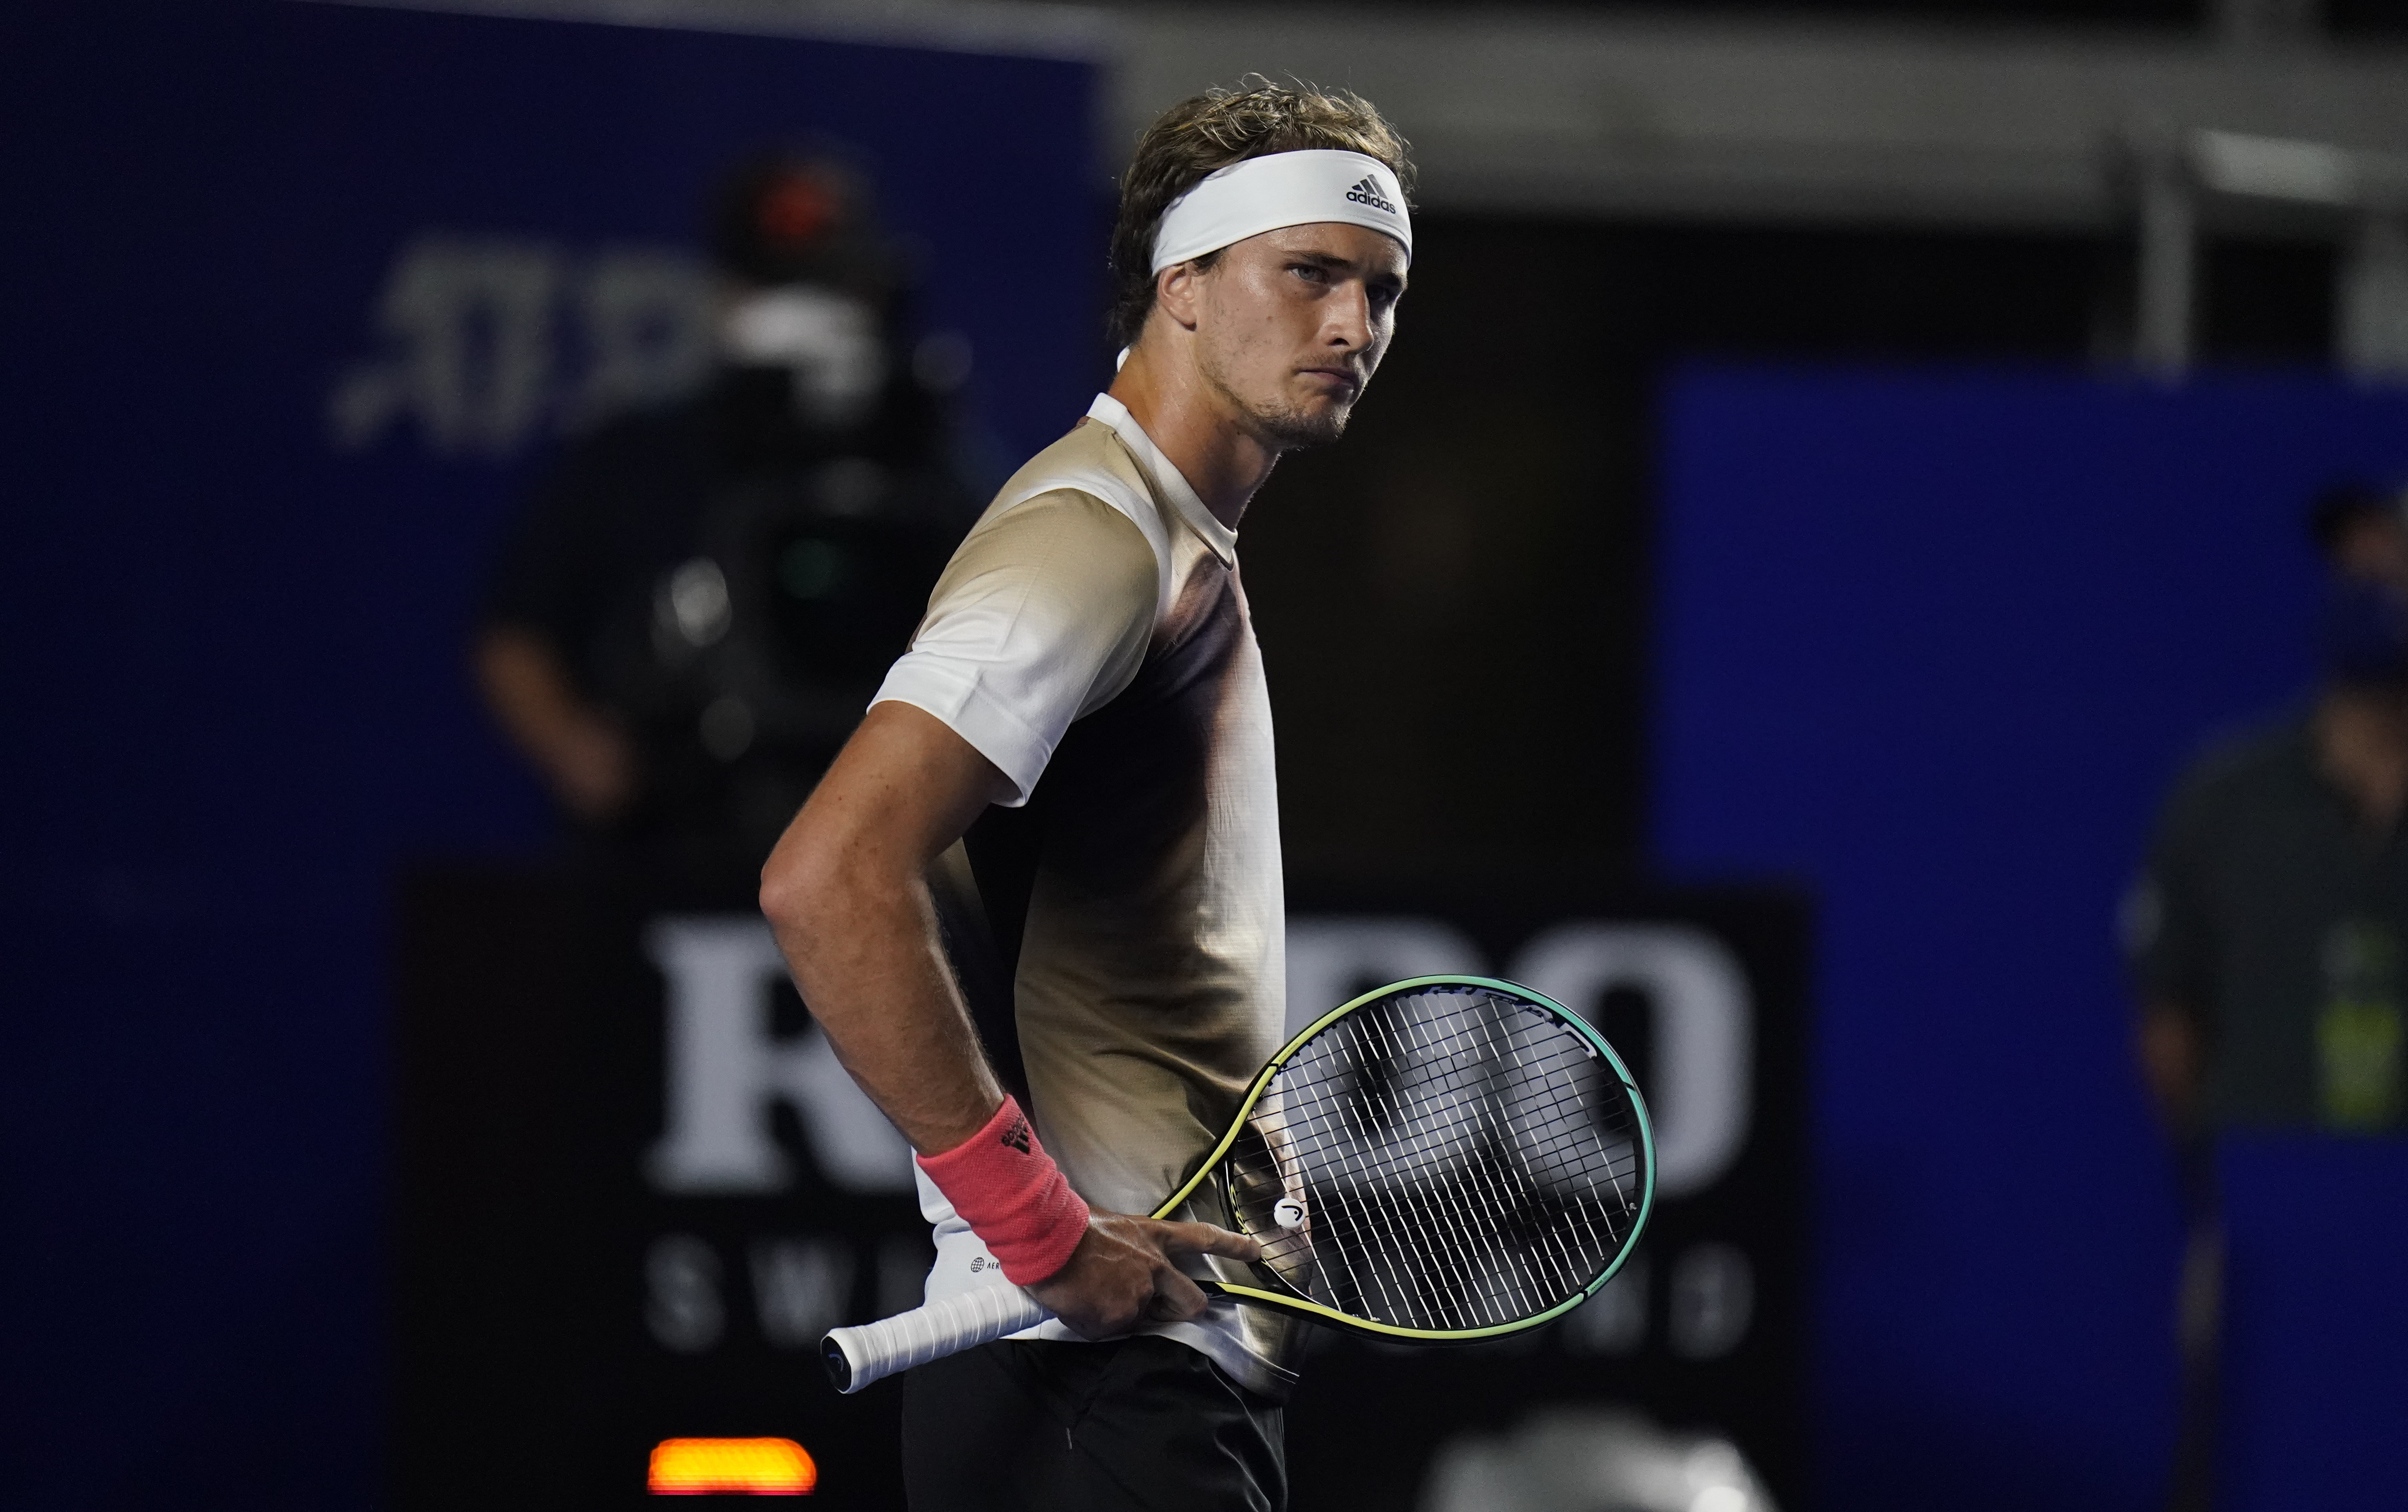 Alexander Zverev kicked out of Mexican Open after angry outburst in Acapulco